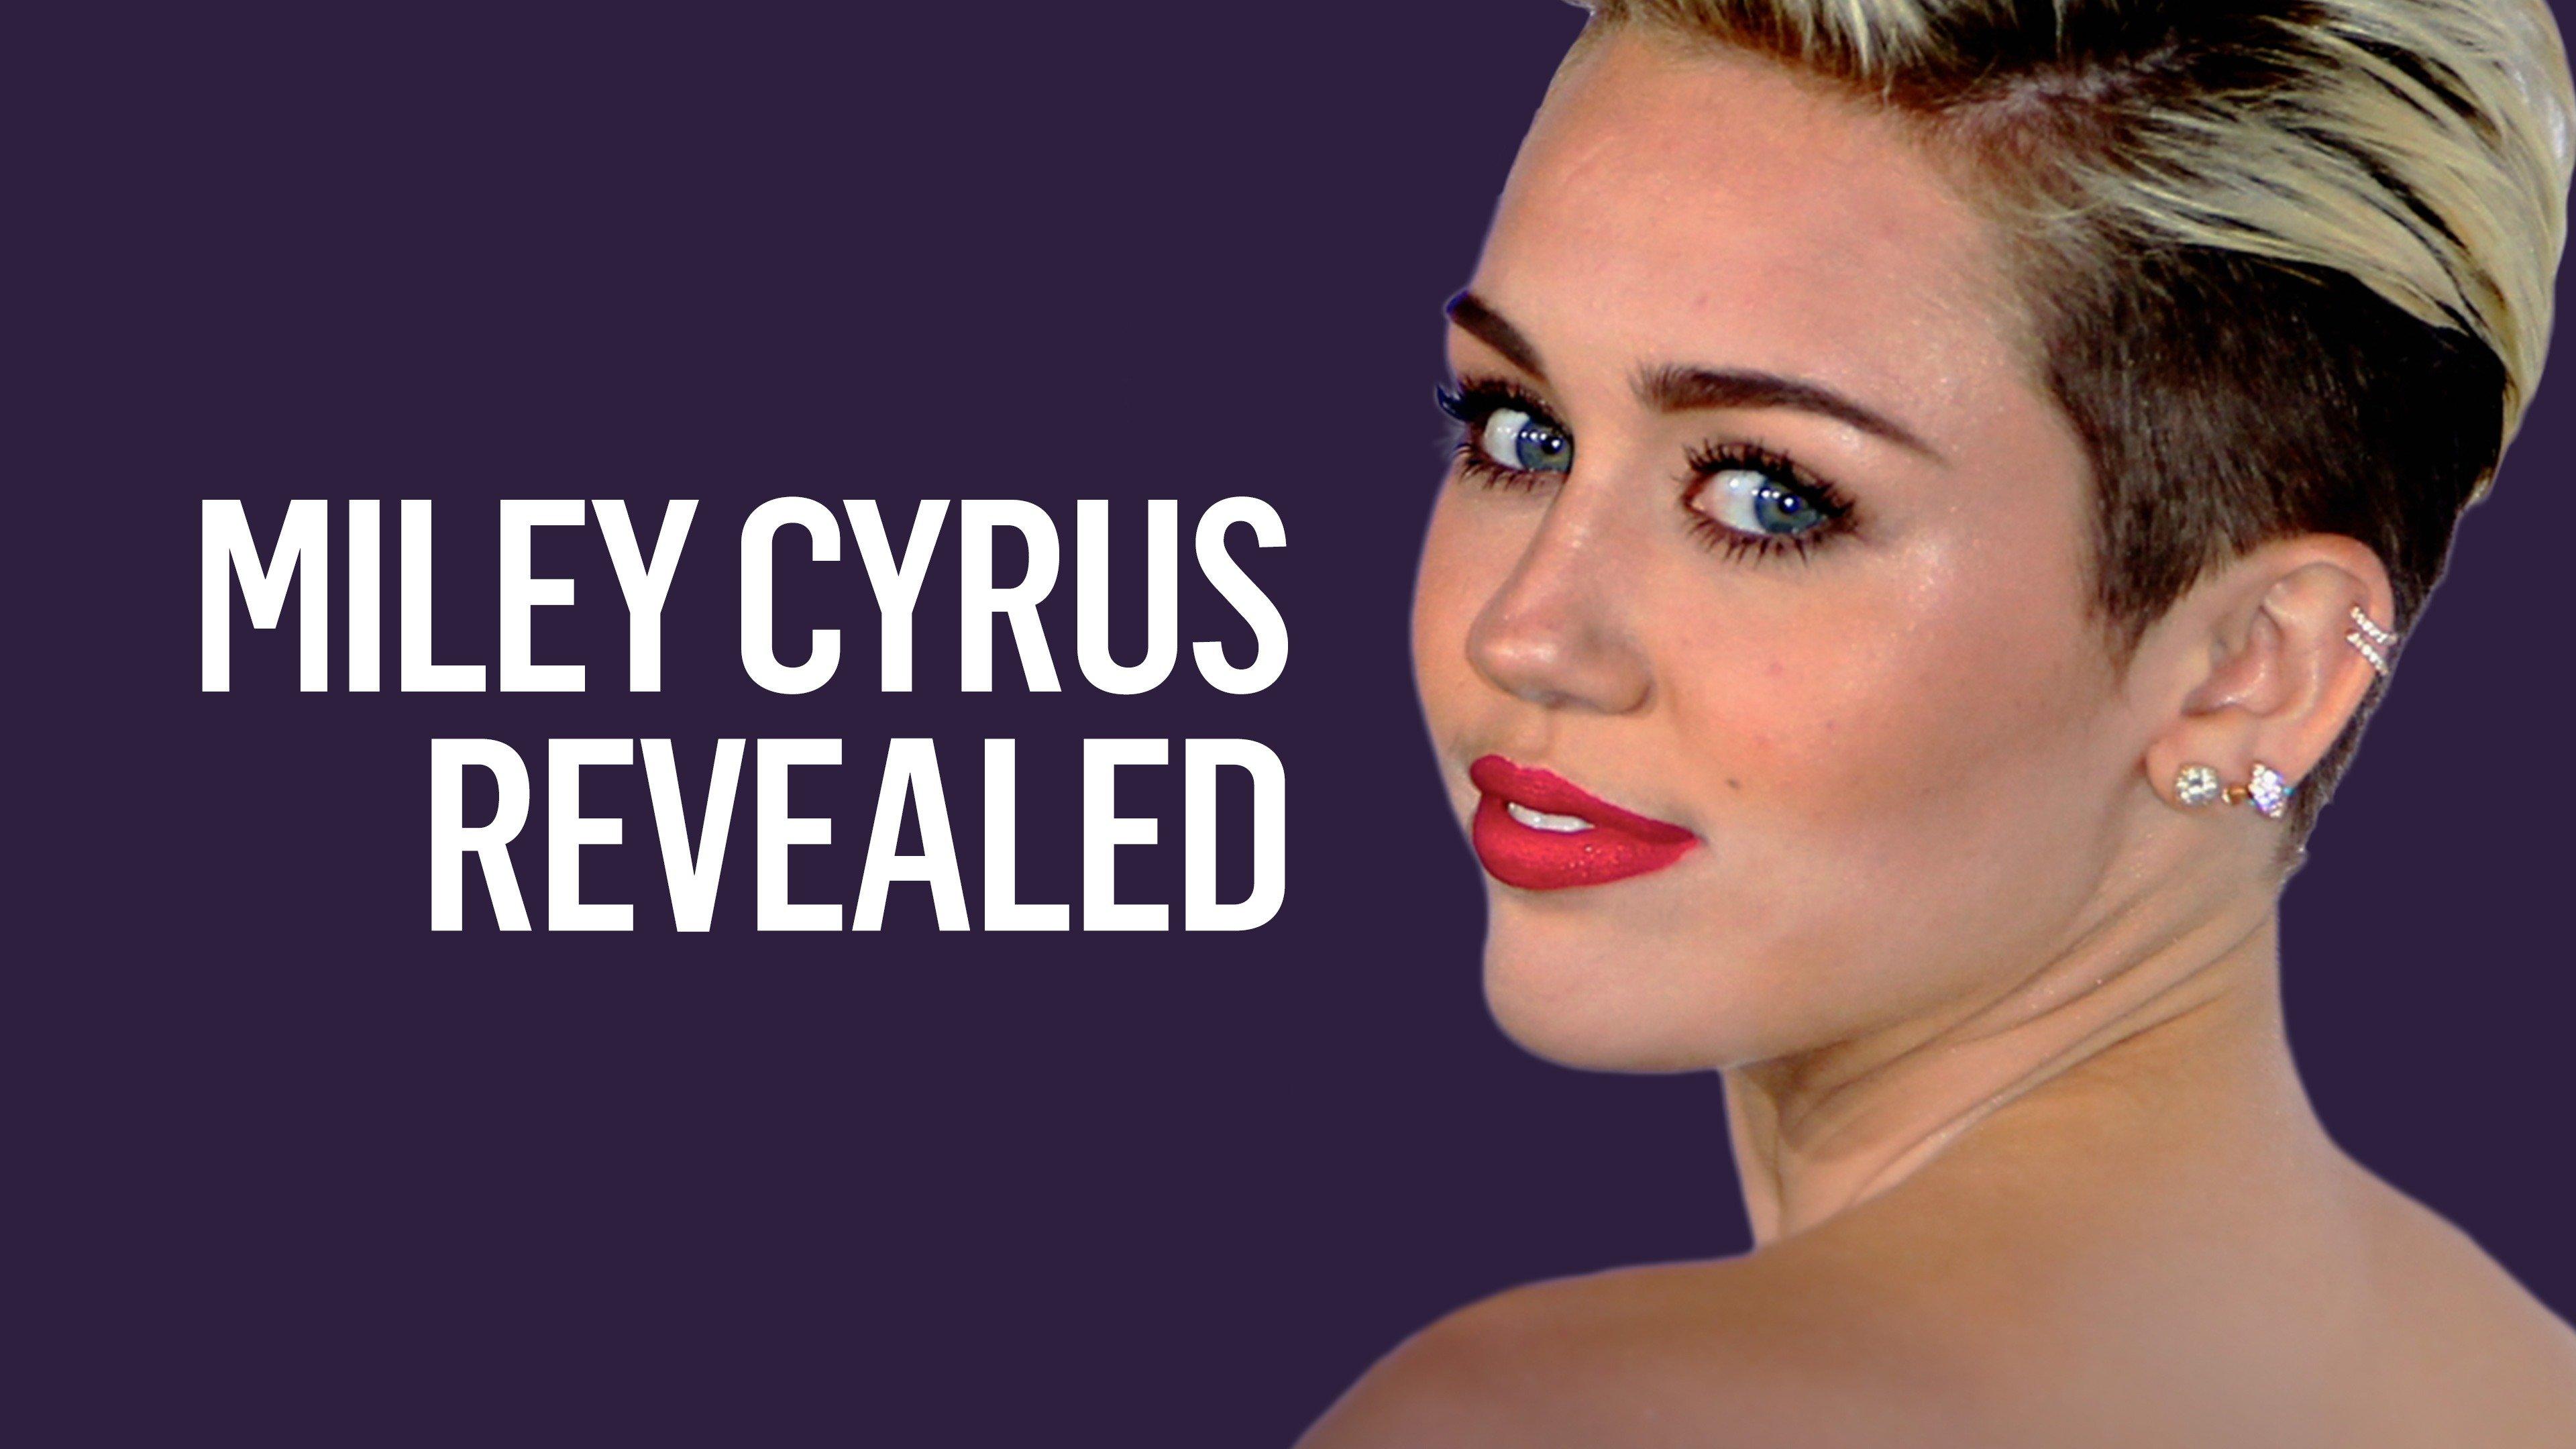 Miley Cyrus Revealed